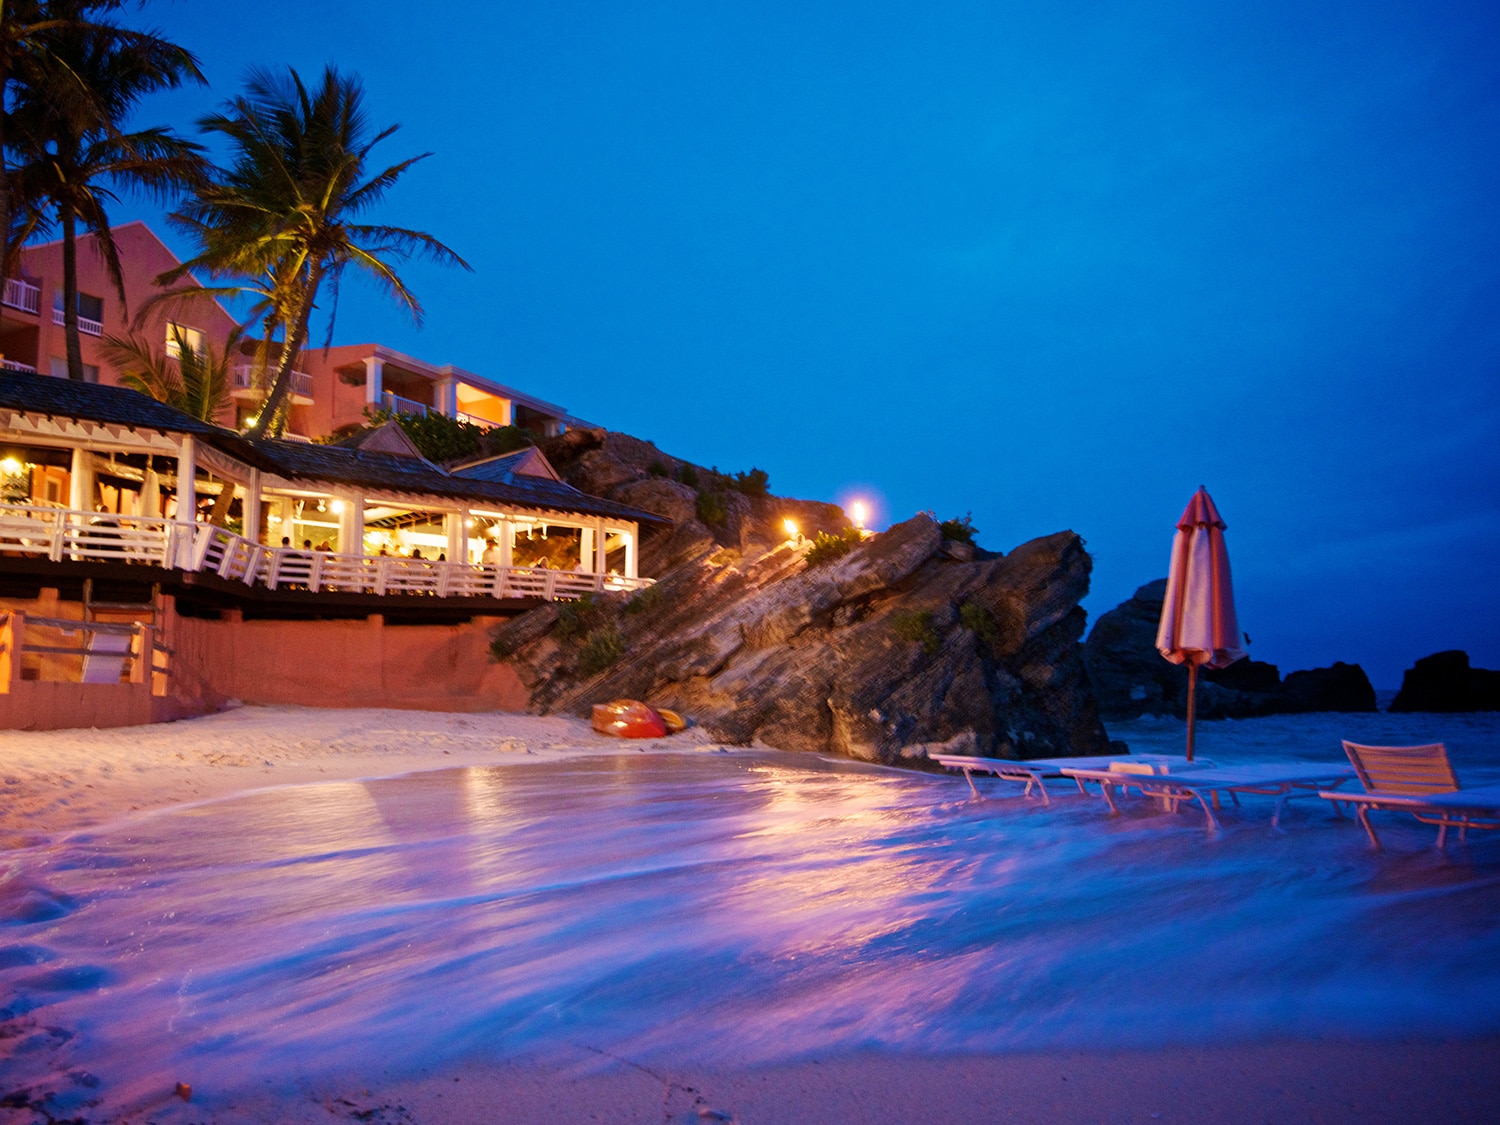 A nighttime view of the exterior and beach at The Reefs Resort and Club in Bermuda.